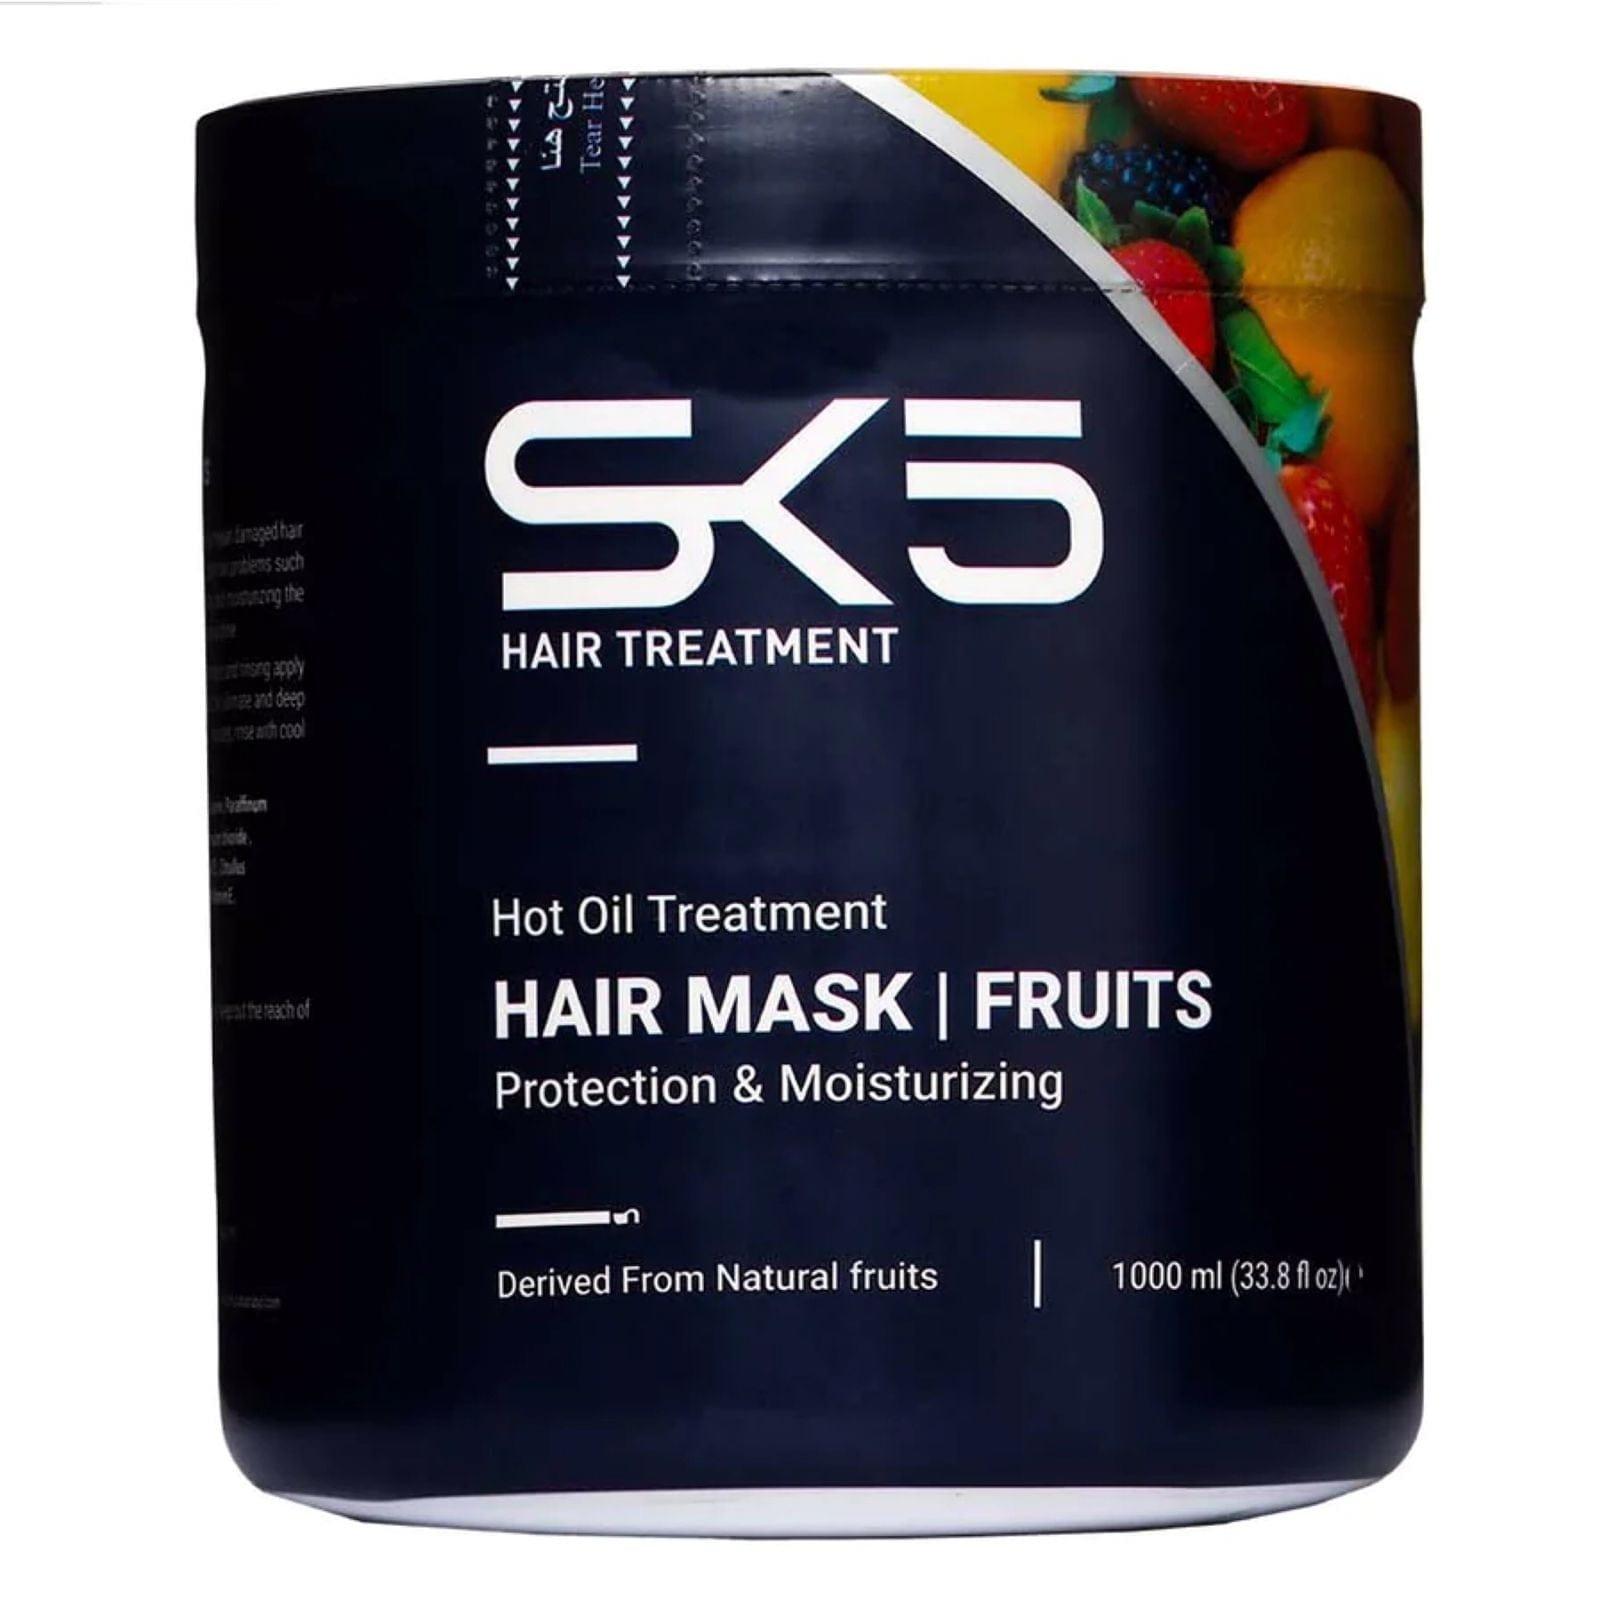 SK5 Hot Oil Treatment Mix Fruits Protection And Moisturizing Hair Mask 1000ml